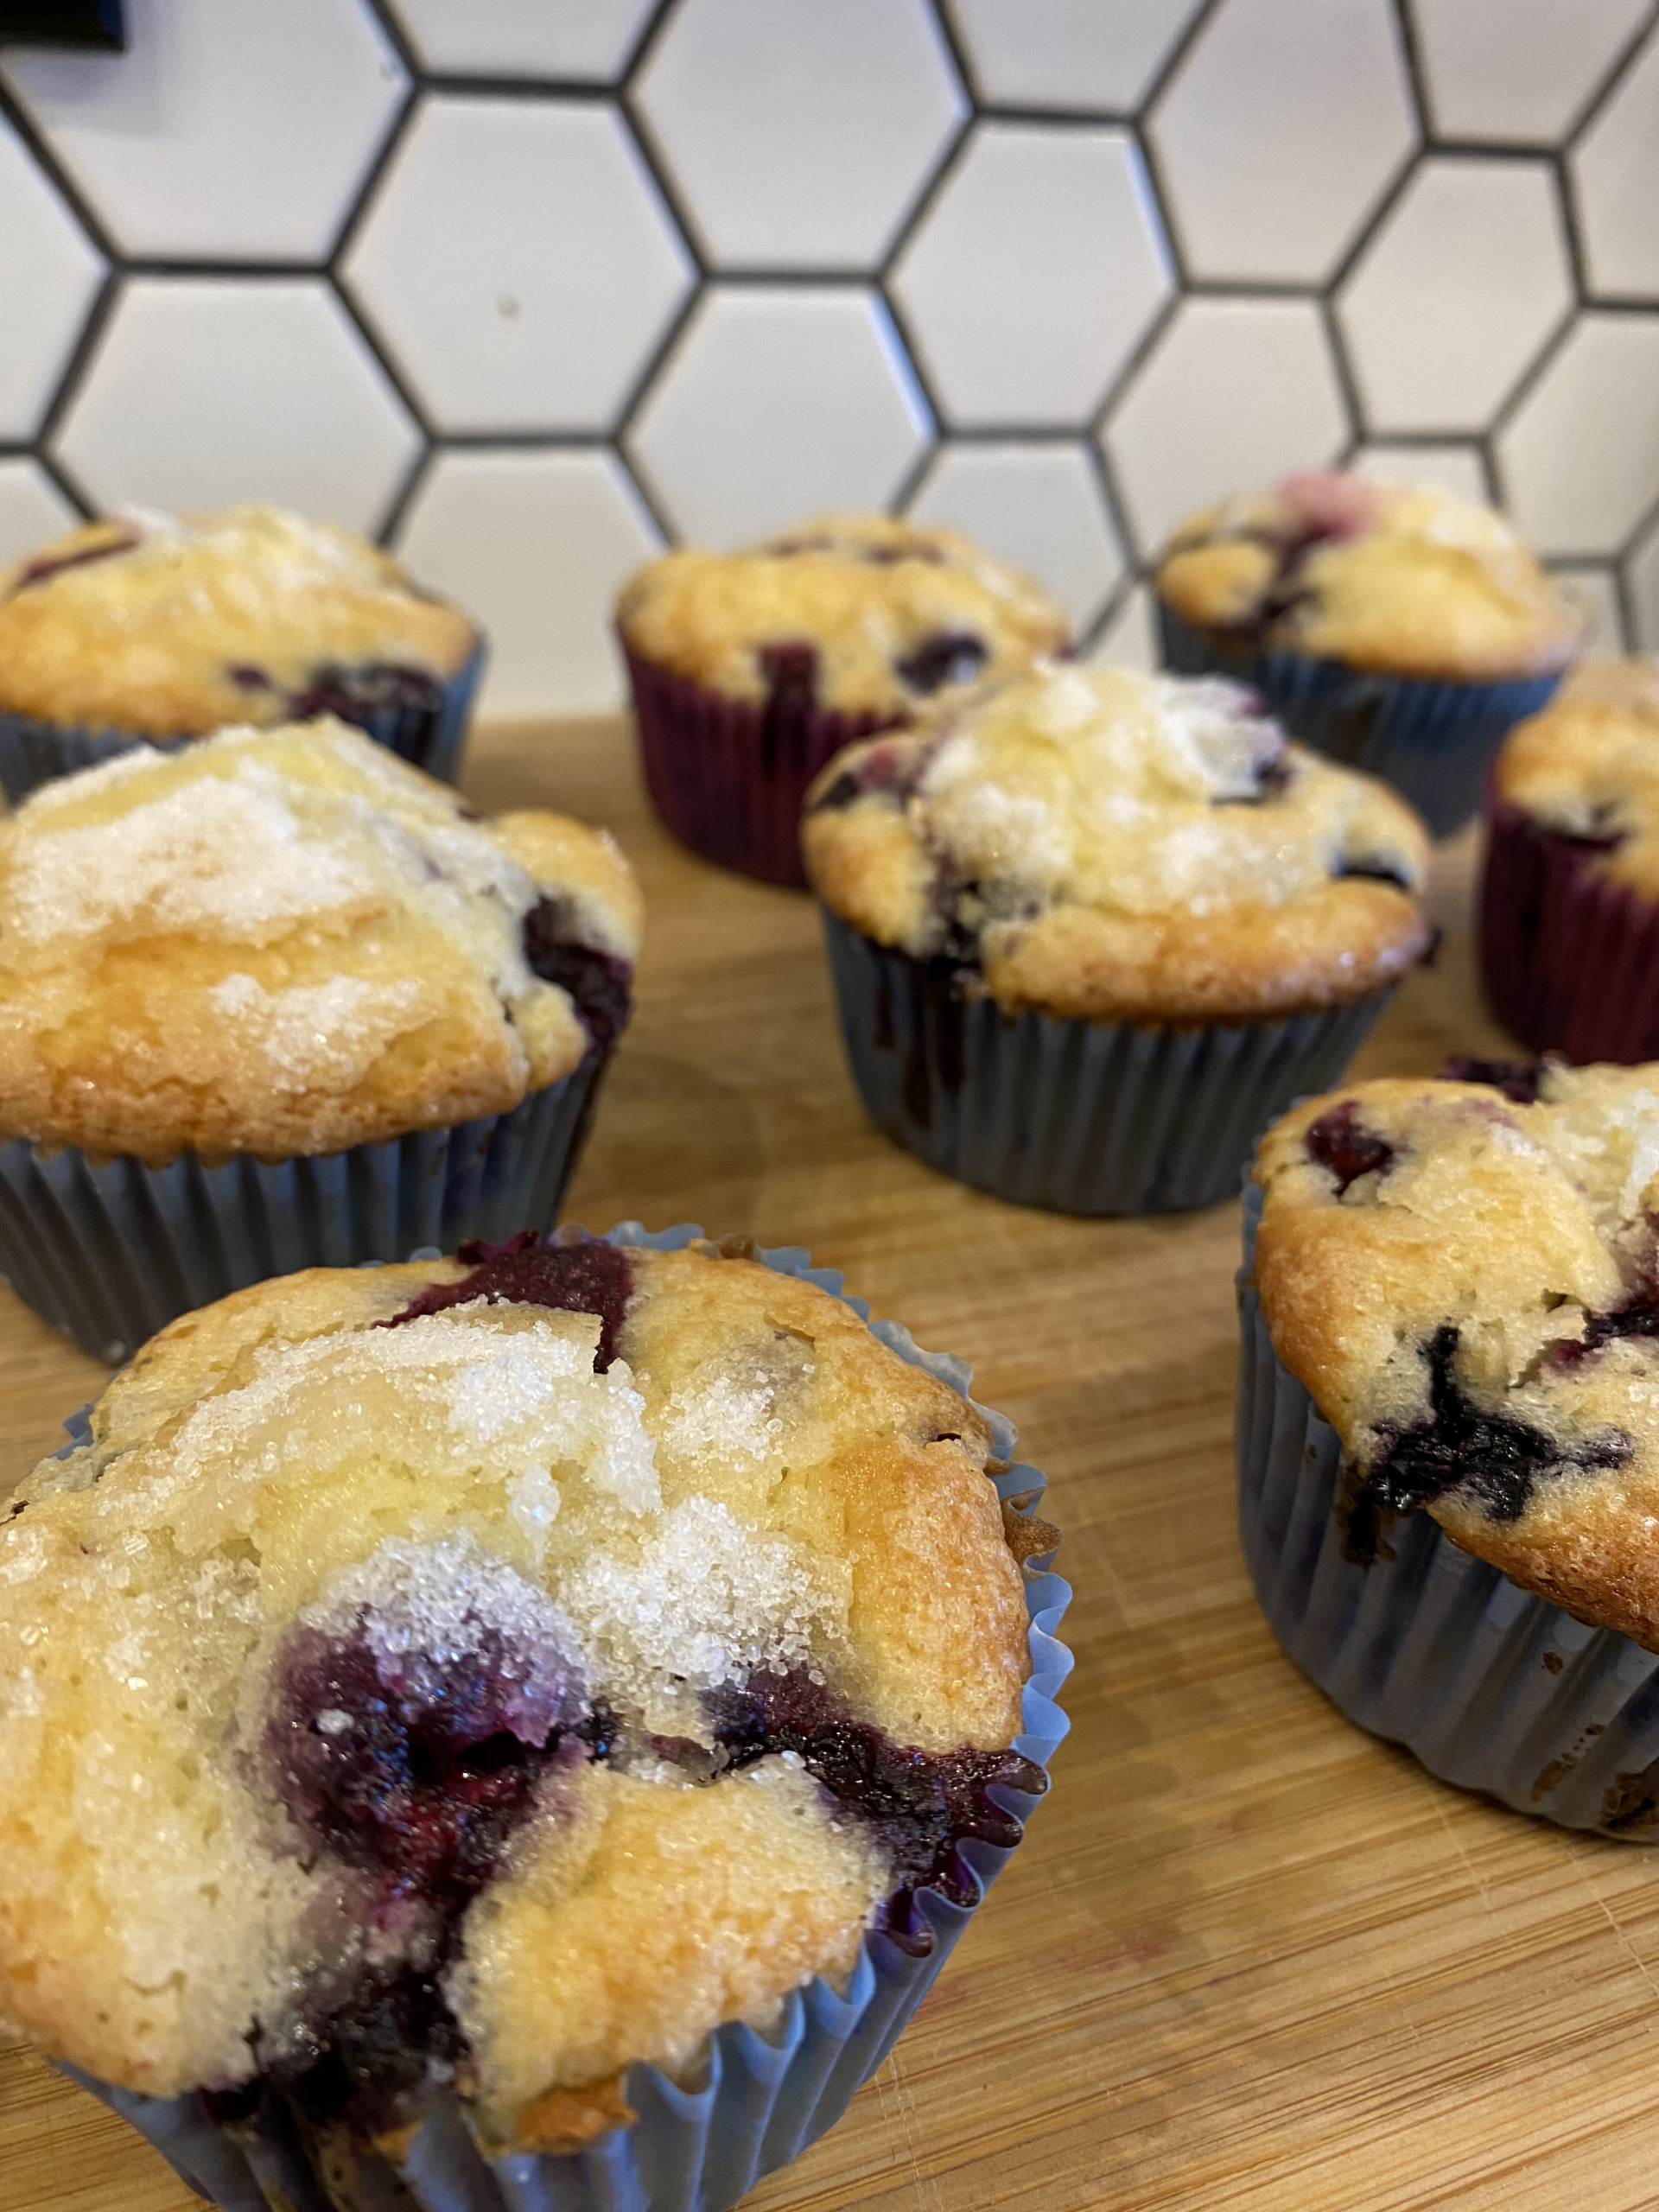 The BEST Blueberry Muffin recipe, from Ali’s kitchen